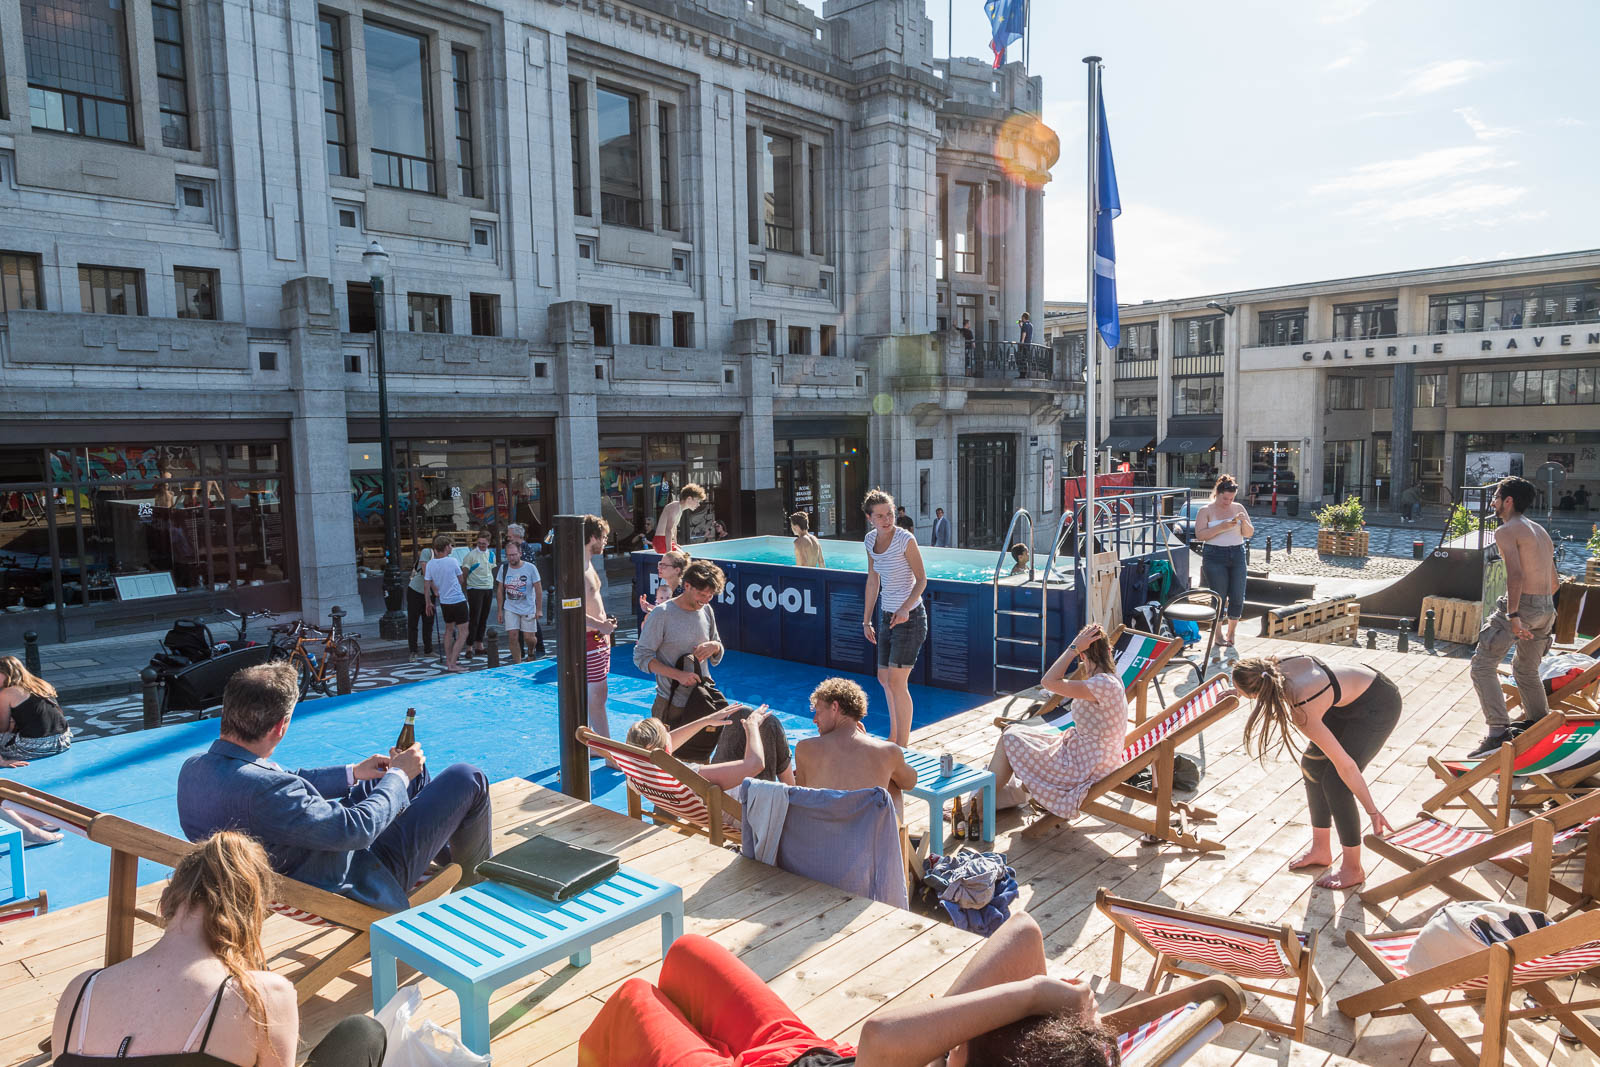  THE BIGGEST PUBLIC OUTDOOR POOL IN BRUSSELS - installation with pool, sun decks and bar in the city centre of Brussels - 2017 